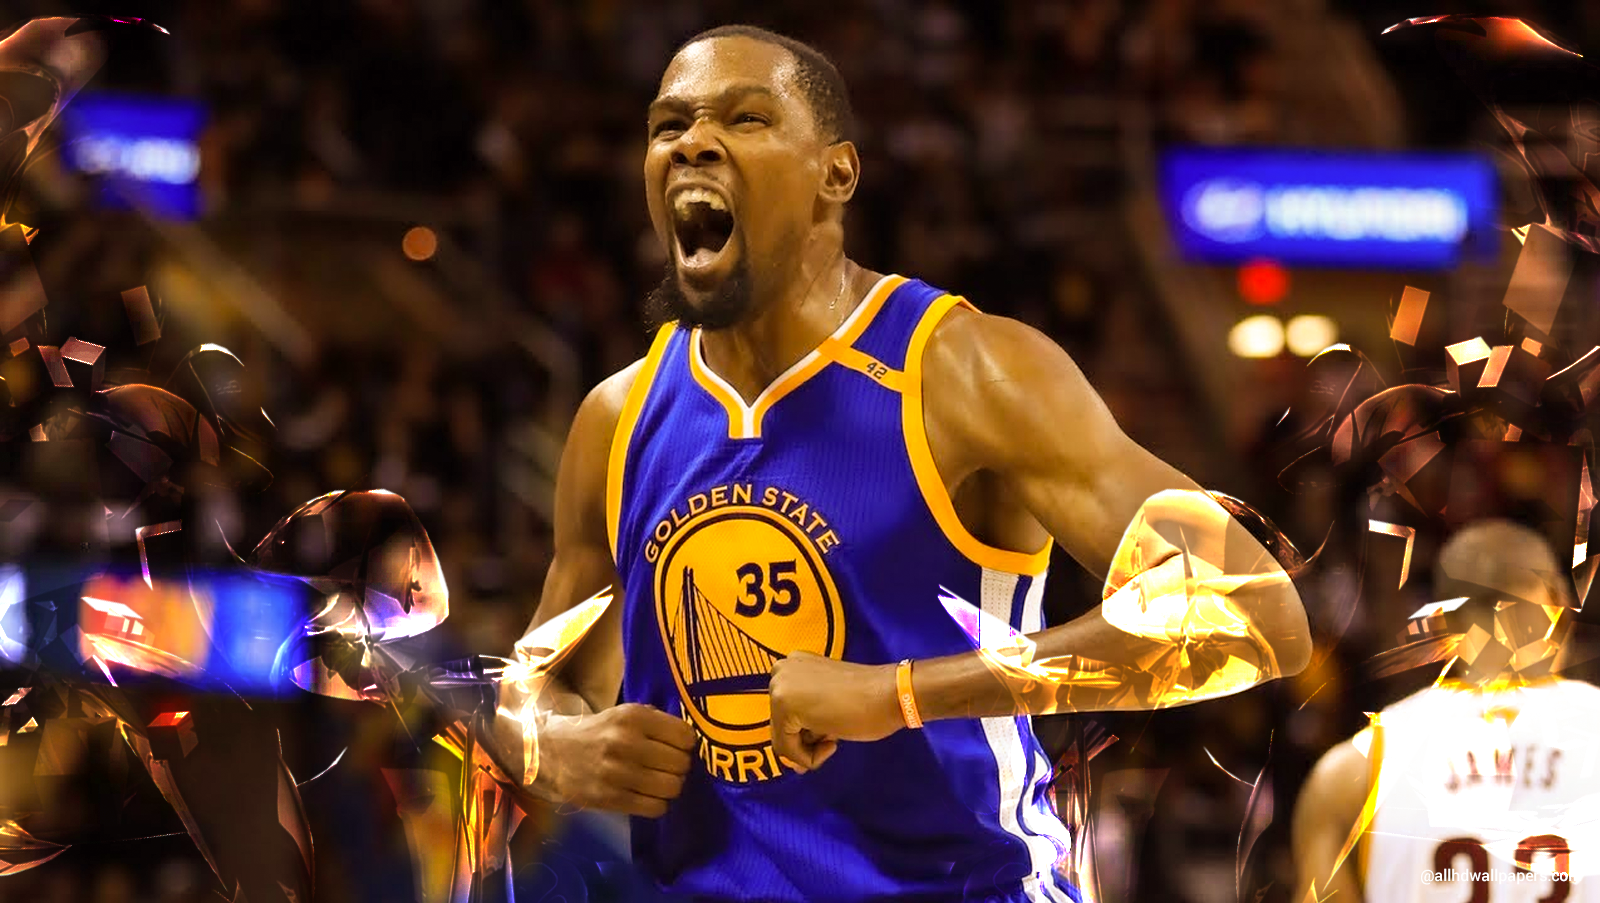 kd and curry wallpaper,basketball player,athlete,muscle,championship,competition event